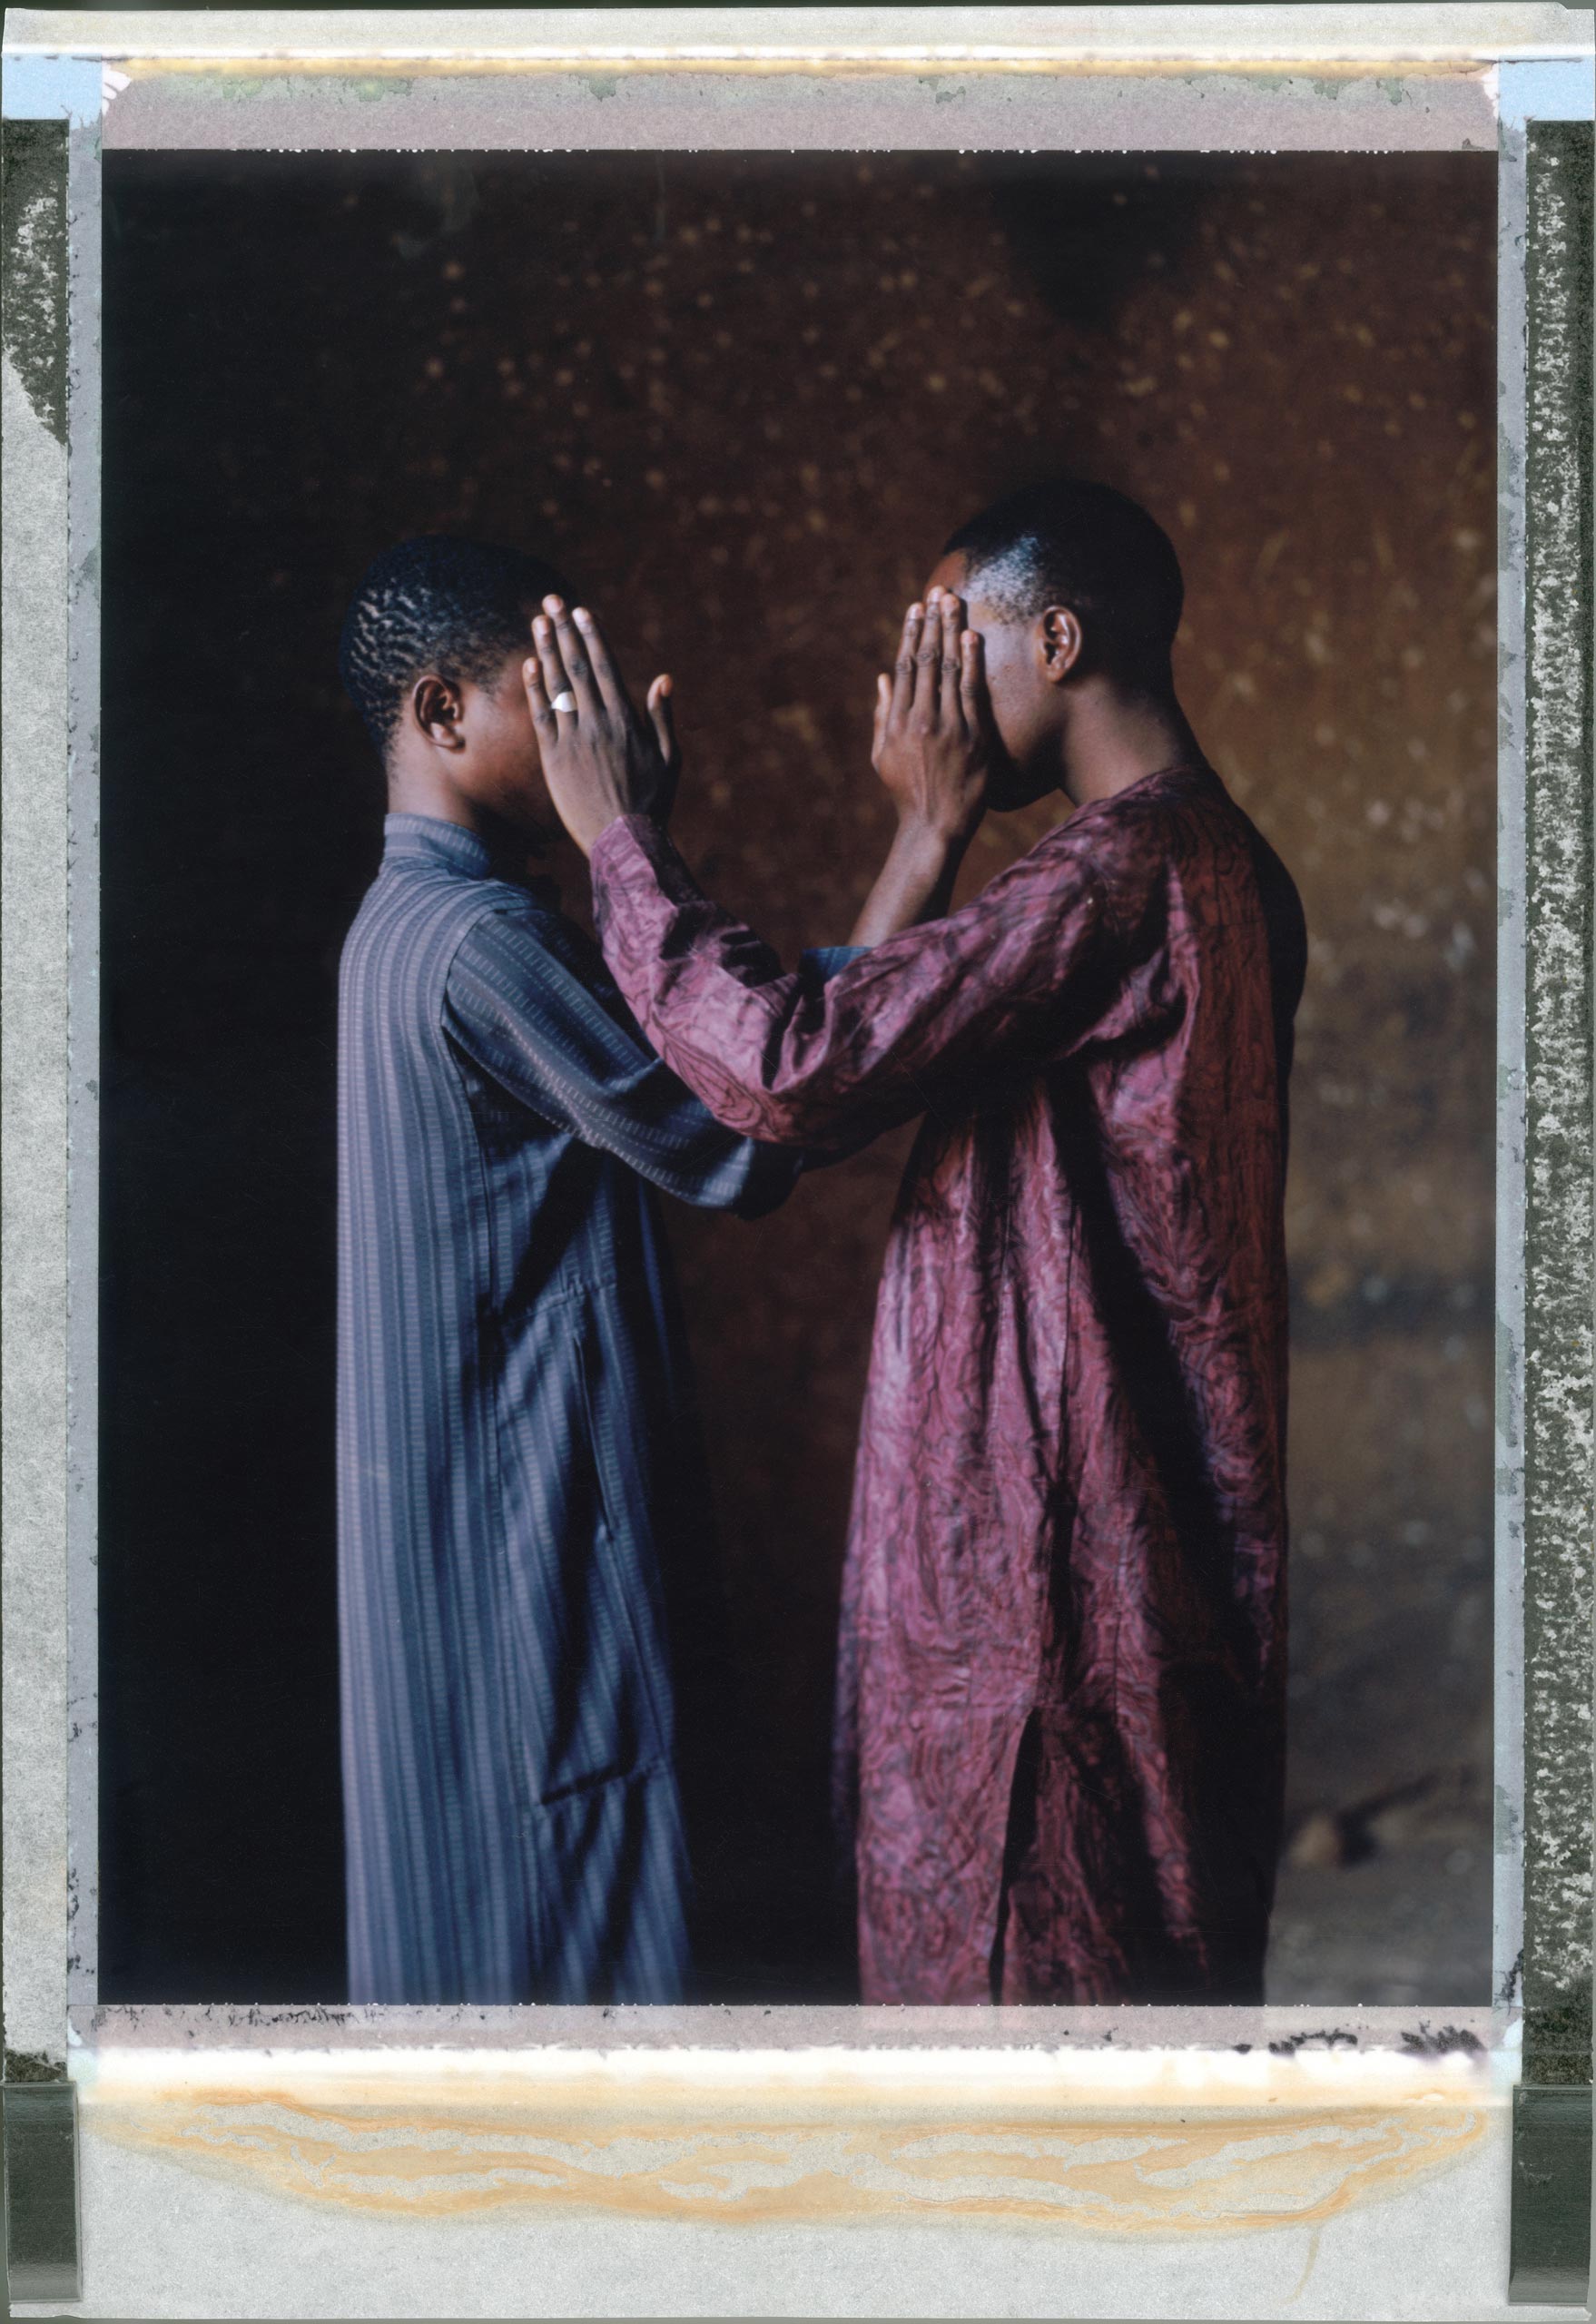 A posed posed portrait of Ishmel (left) and Gabriel (right) (not their real names) who are gay. In December 2013 they were taken from their homes by a vigilante group aligned to Bauchi City Sharia Courts who suspected them of being gay. They slapped and beat them with electric cables. He was held in prison for over 40 days. He made several appearances at the Sharia Court. They were lashed 15 times with a horse whip, but then acquitted of committing homosexual acts as there were no witnesses to the crime. Sodomy is punishable by death under Sharia Law but requires four witnesses. Since Nigeria’s president signed a harsh law criminalizing homosexuality throughout the country, arrests of gay people have multiplied, advocates have been forced to go underground, some people fearful of the law have sought asylum overseas and news media demands for a crackdown have flourished. Three young men were recently flogged 20 times in a northern Nigerian court room for being gay. Some consider them lucky. The penalty for gay sex under local Islamic law is death by stoning. Nigeria, April 2014.   While many countries around the world are legally recognizing same-sex relationships, individuals in nearly 80 countries face criminal sanctions for private consensual relations with another adult of the same sex. Violence and discrimination based on sexual orientation or gender expression is even more widespread. Africa is becoming the worst continent for Lesbian, Gay, Bi-sexual, Transgender, Queer, Inter-sex (LGBTQI) individuals. More than two thirds of African countries have laws criminalizing consensual same-sex acts. In some, homosexuality is punishable by death. In Nigeria new homophobic laws introduced in 2013 led to dramatic increase in attacks. Under Sharia Law, homosexuality is punishable by death, up to 50 lashes and six months in prison for woman; for men elsewhere, up to 14 years in prison. Same sex acts are illegal in Uganda. A discriminatory law was passed then struck down